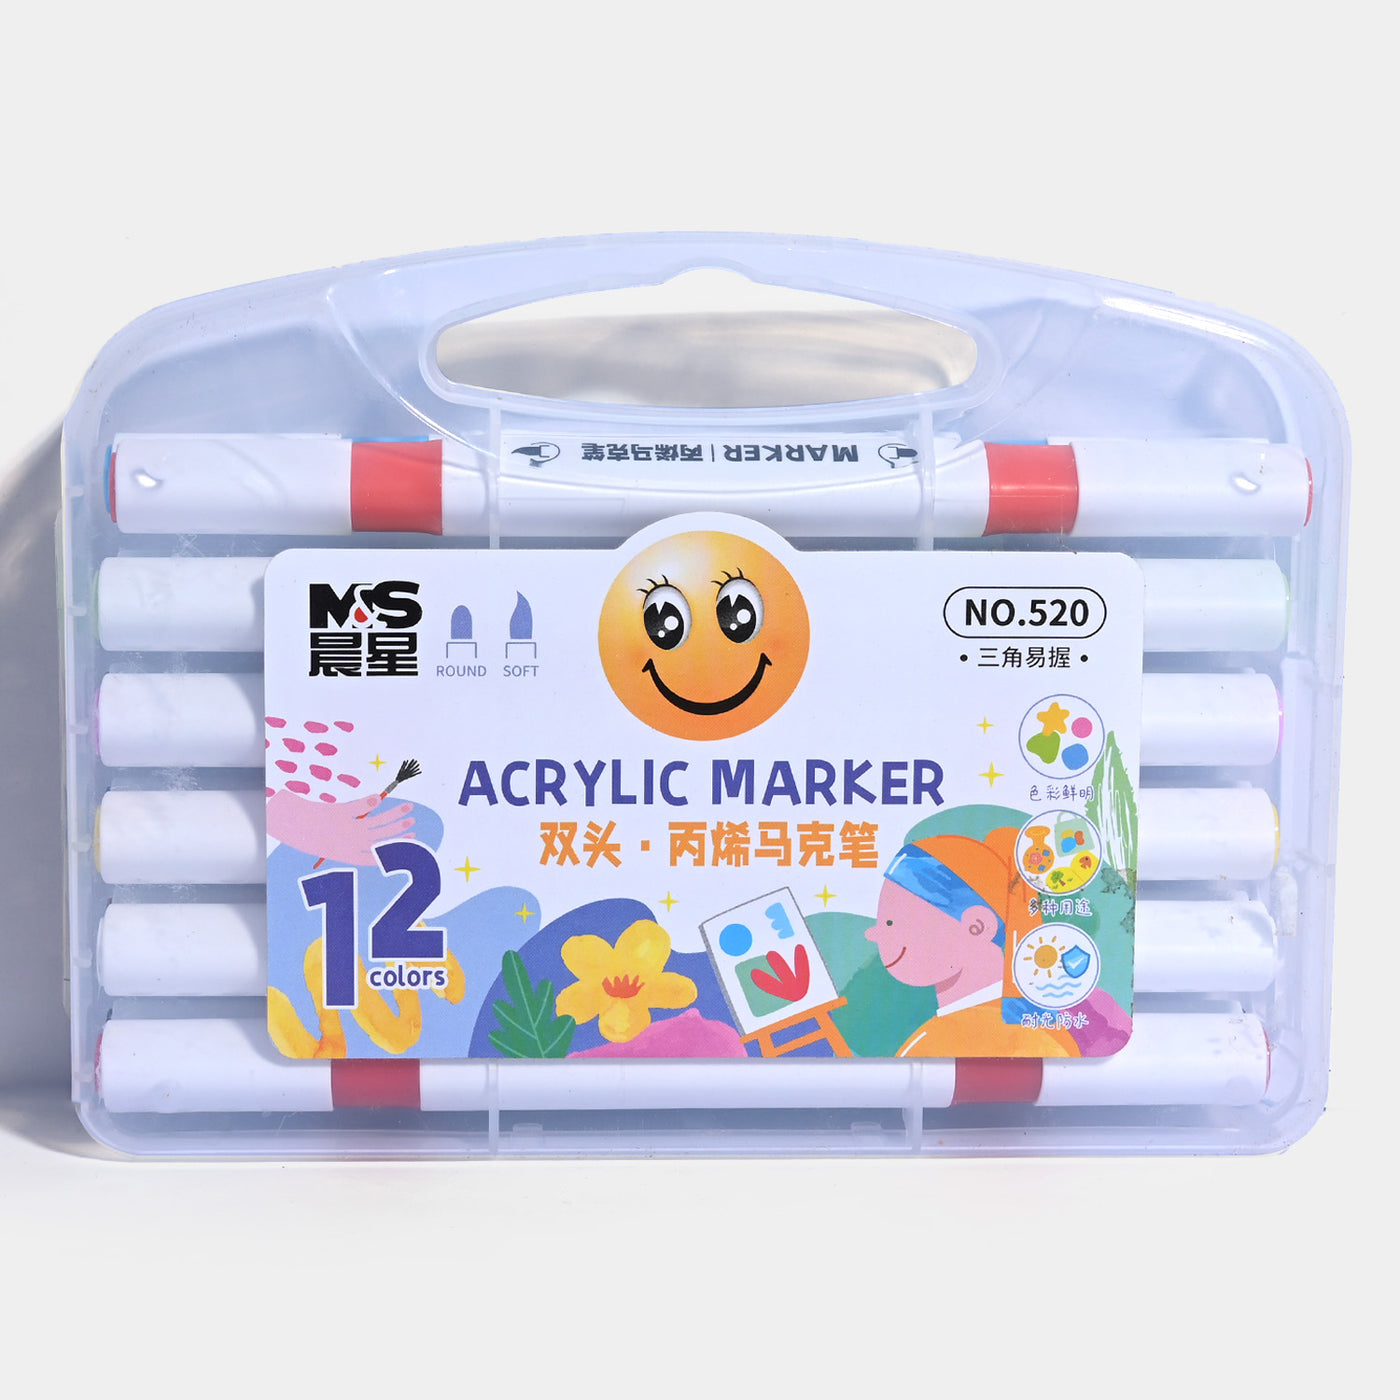 DOUBLE SIDED MARKER MULTICOLOR 12 PCS